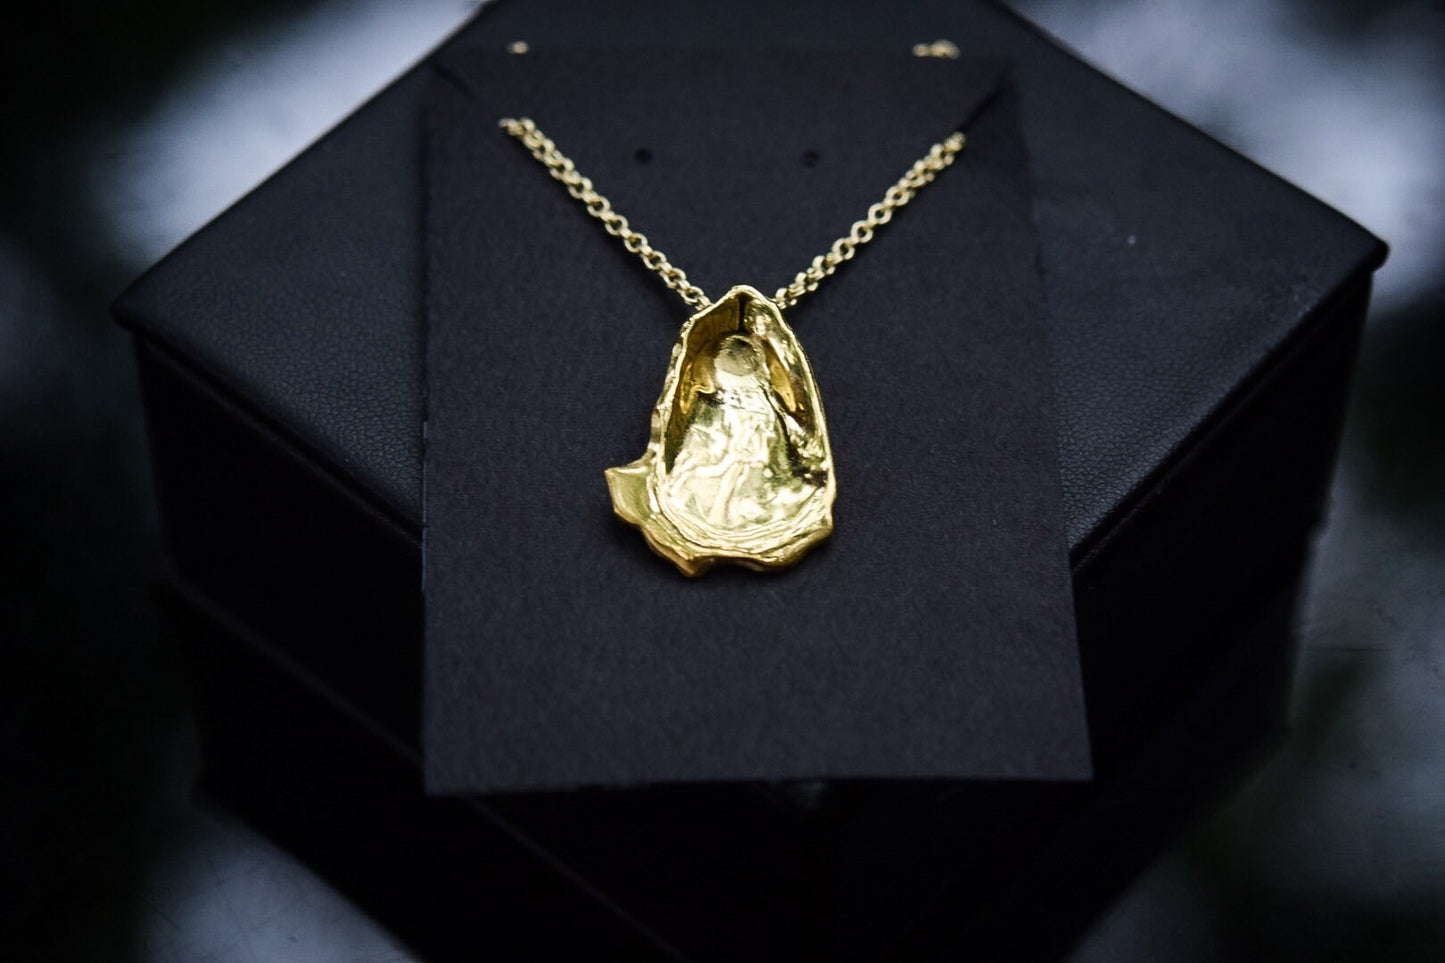 Gold Oyster Necklace/ 14k Gold Vermeil/ Oyster Necklace